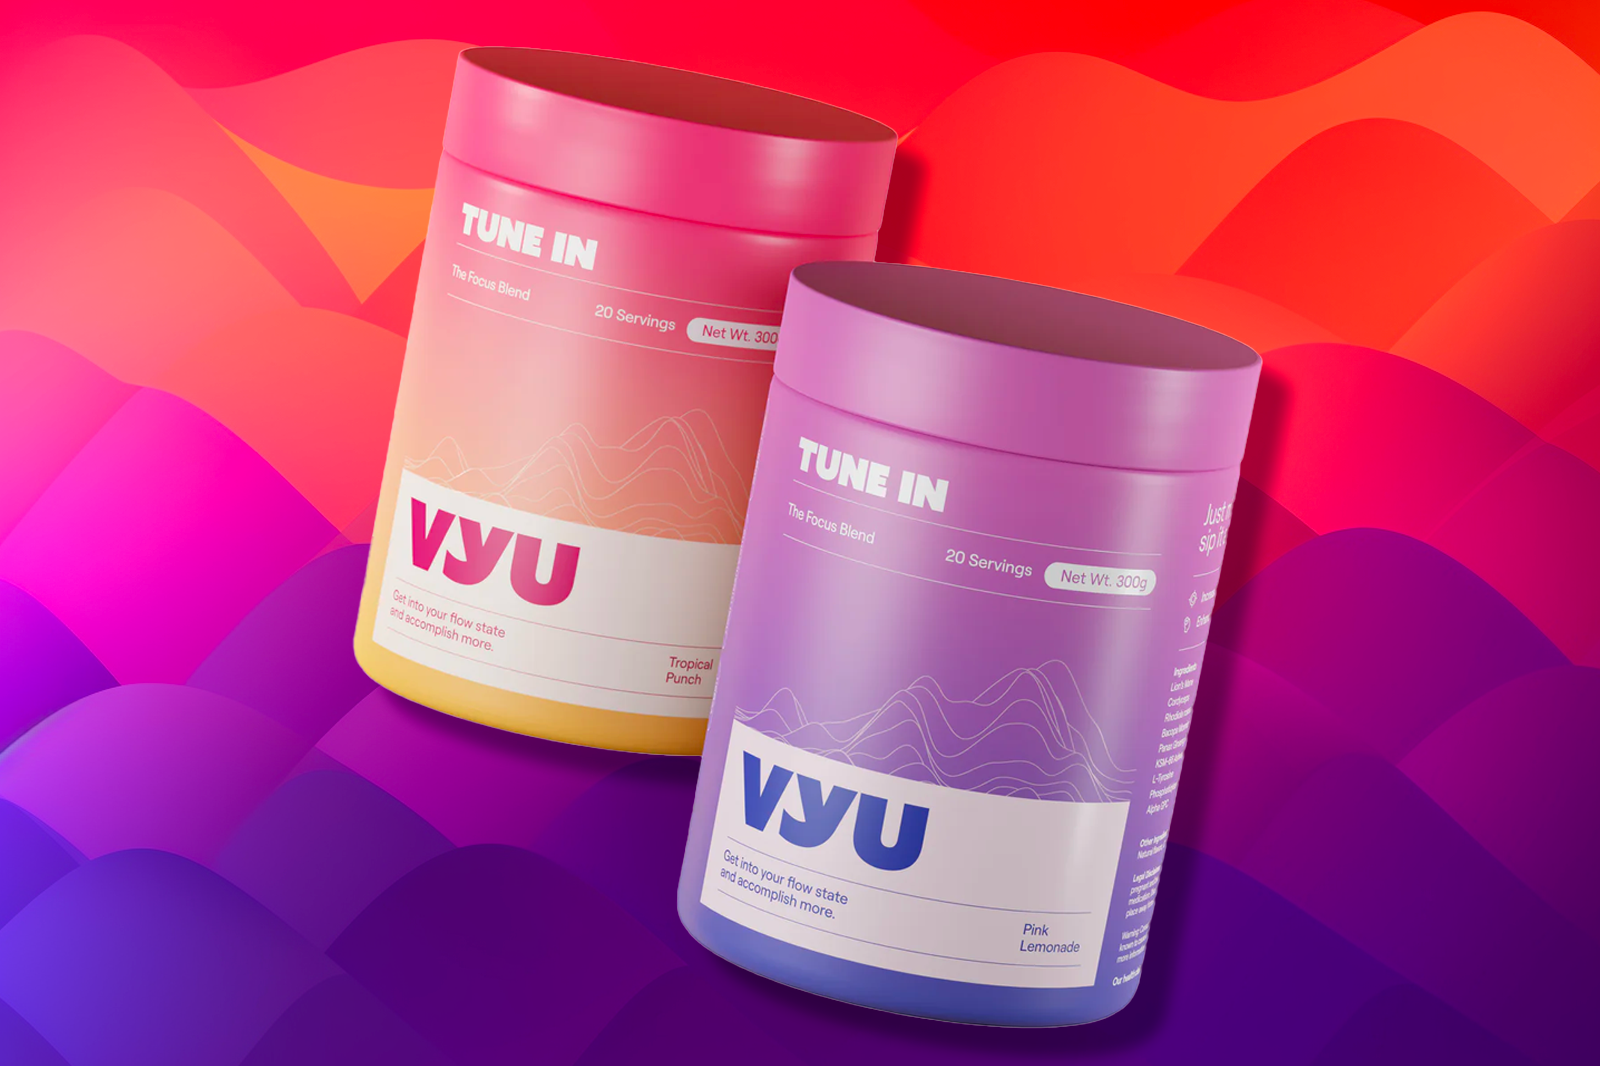 Two VYU 300g TUNE IN containers with Tropical Punch and Pink Lemonade flavors, placed against a multicolored background